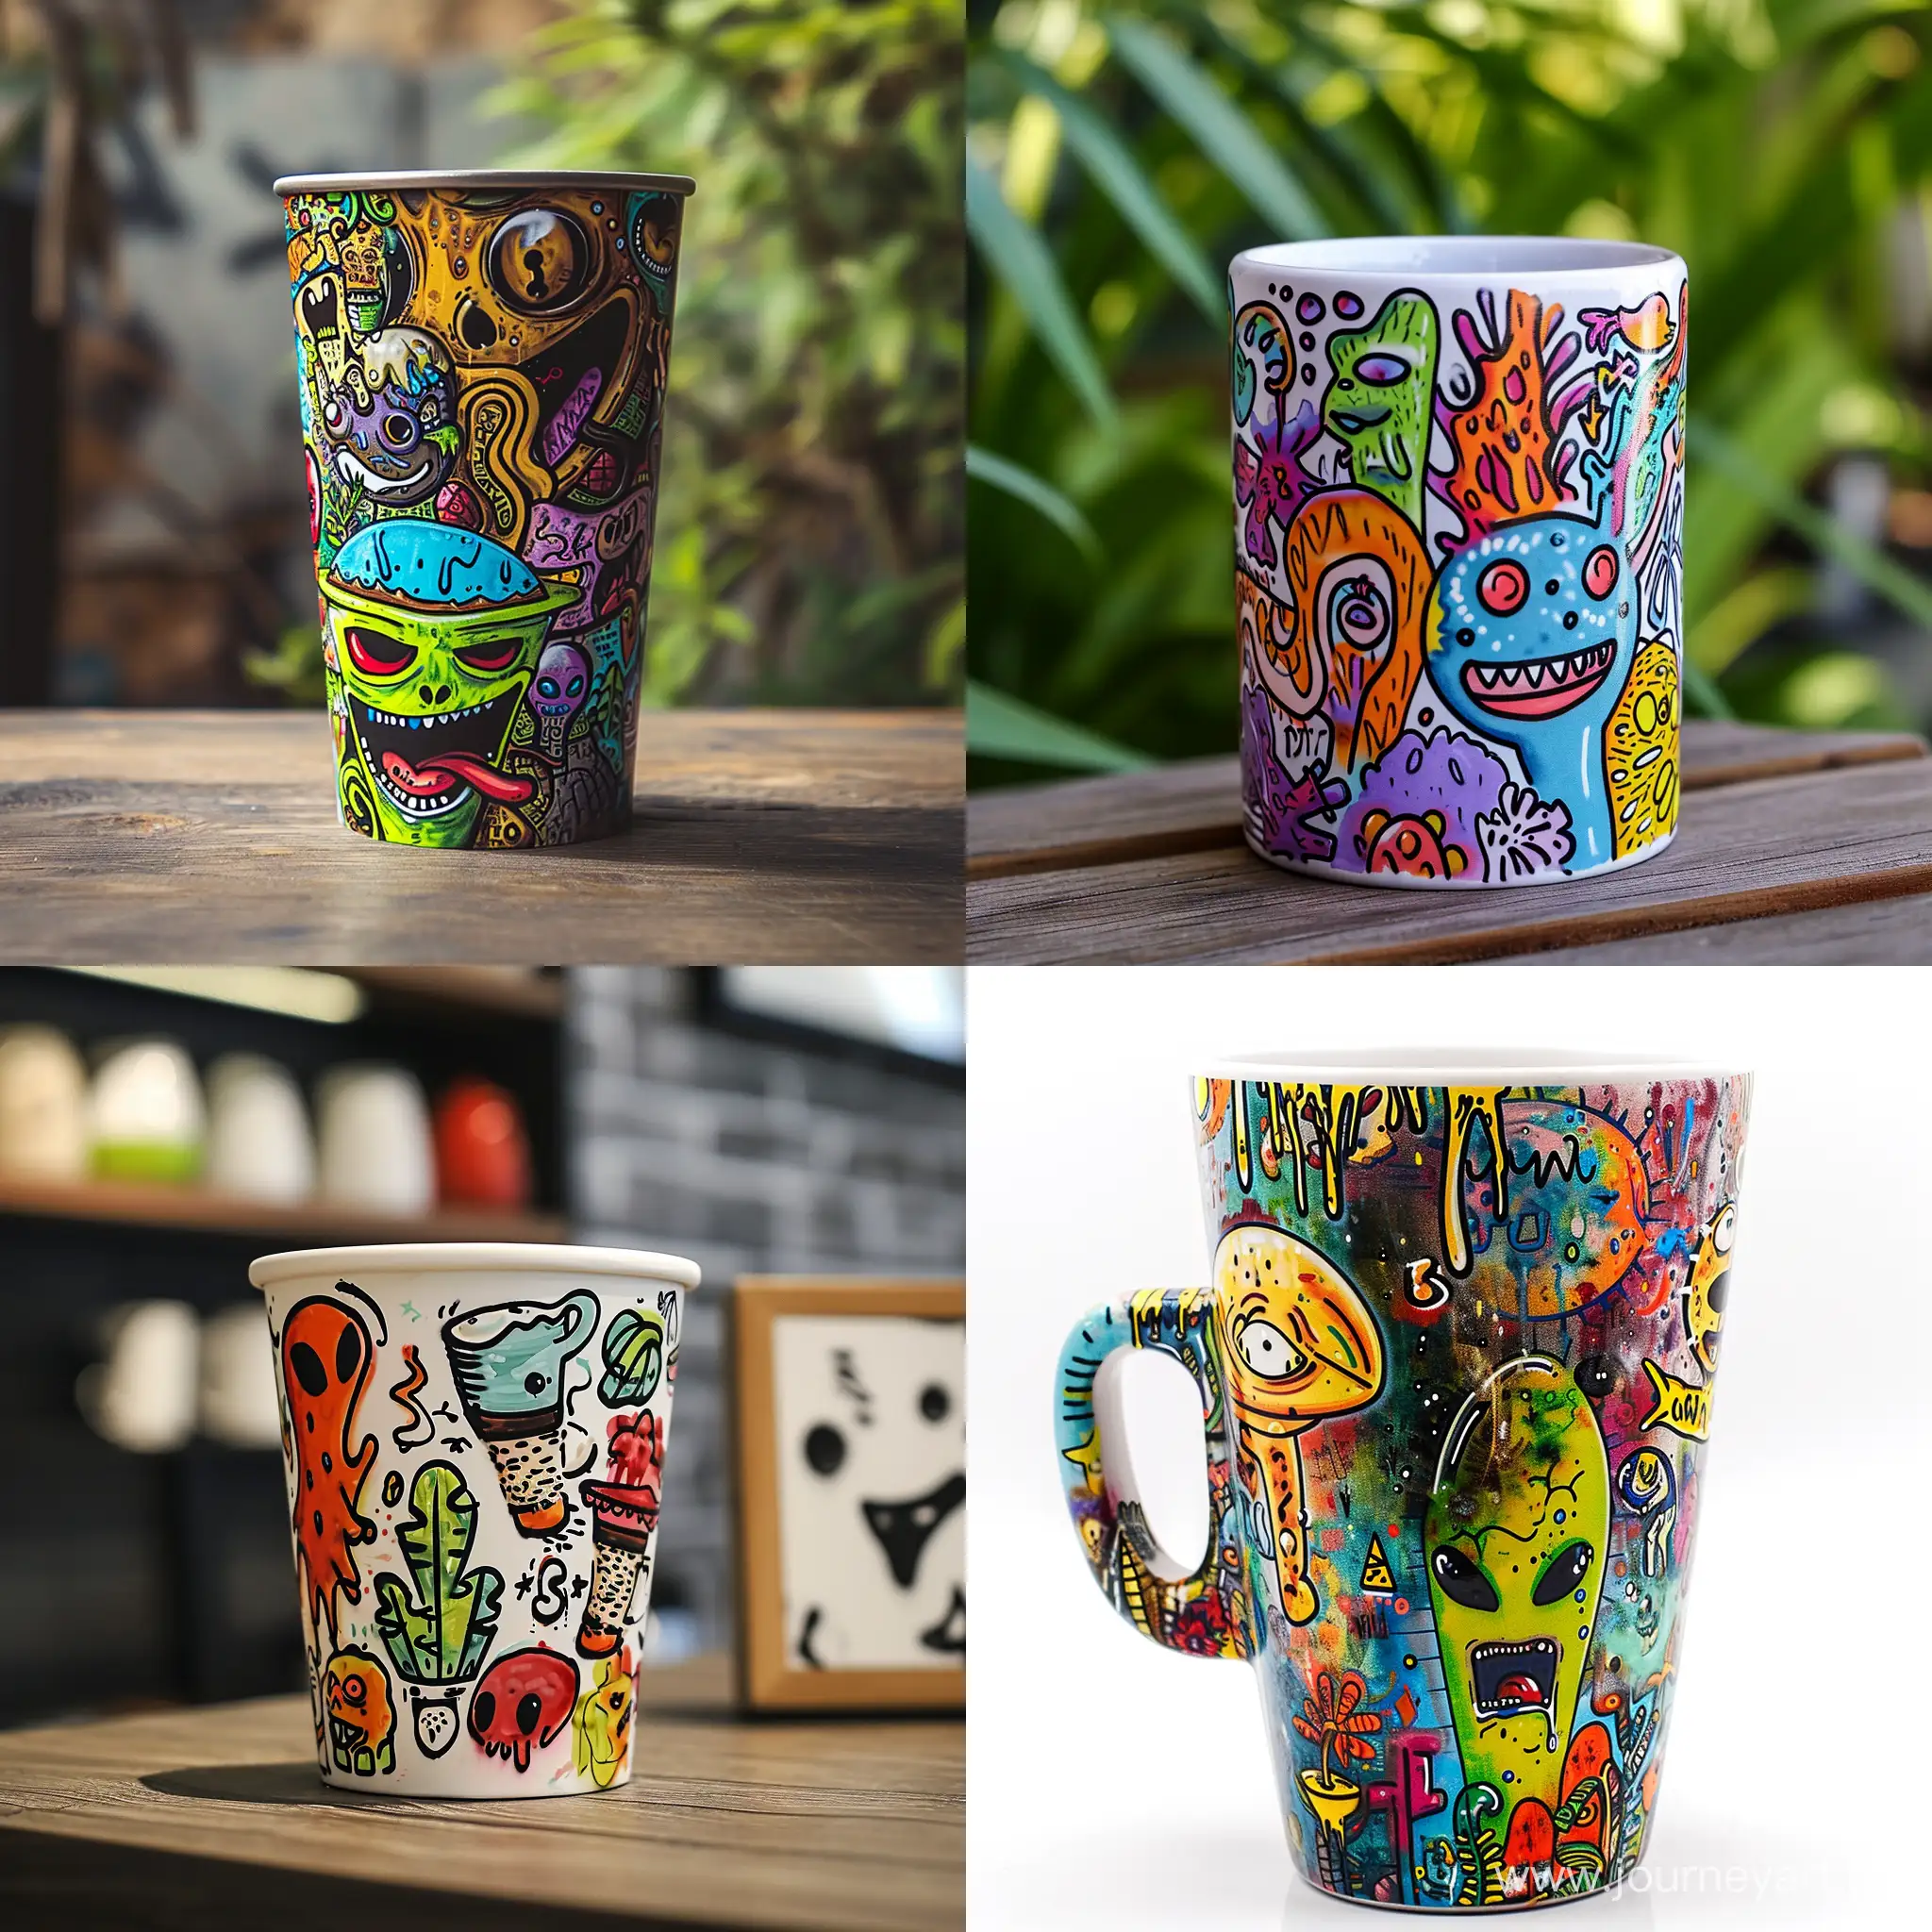 Graffiti-Coffee-Cup-with-Coffee-Plants-and-Aliens